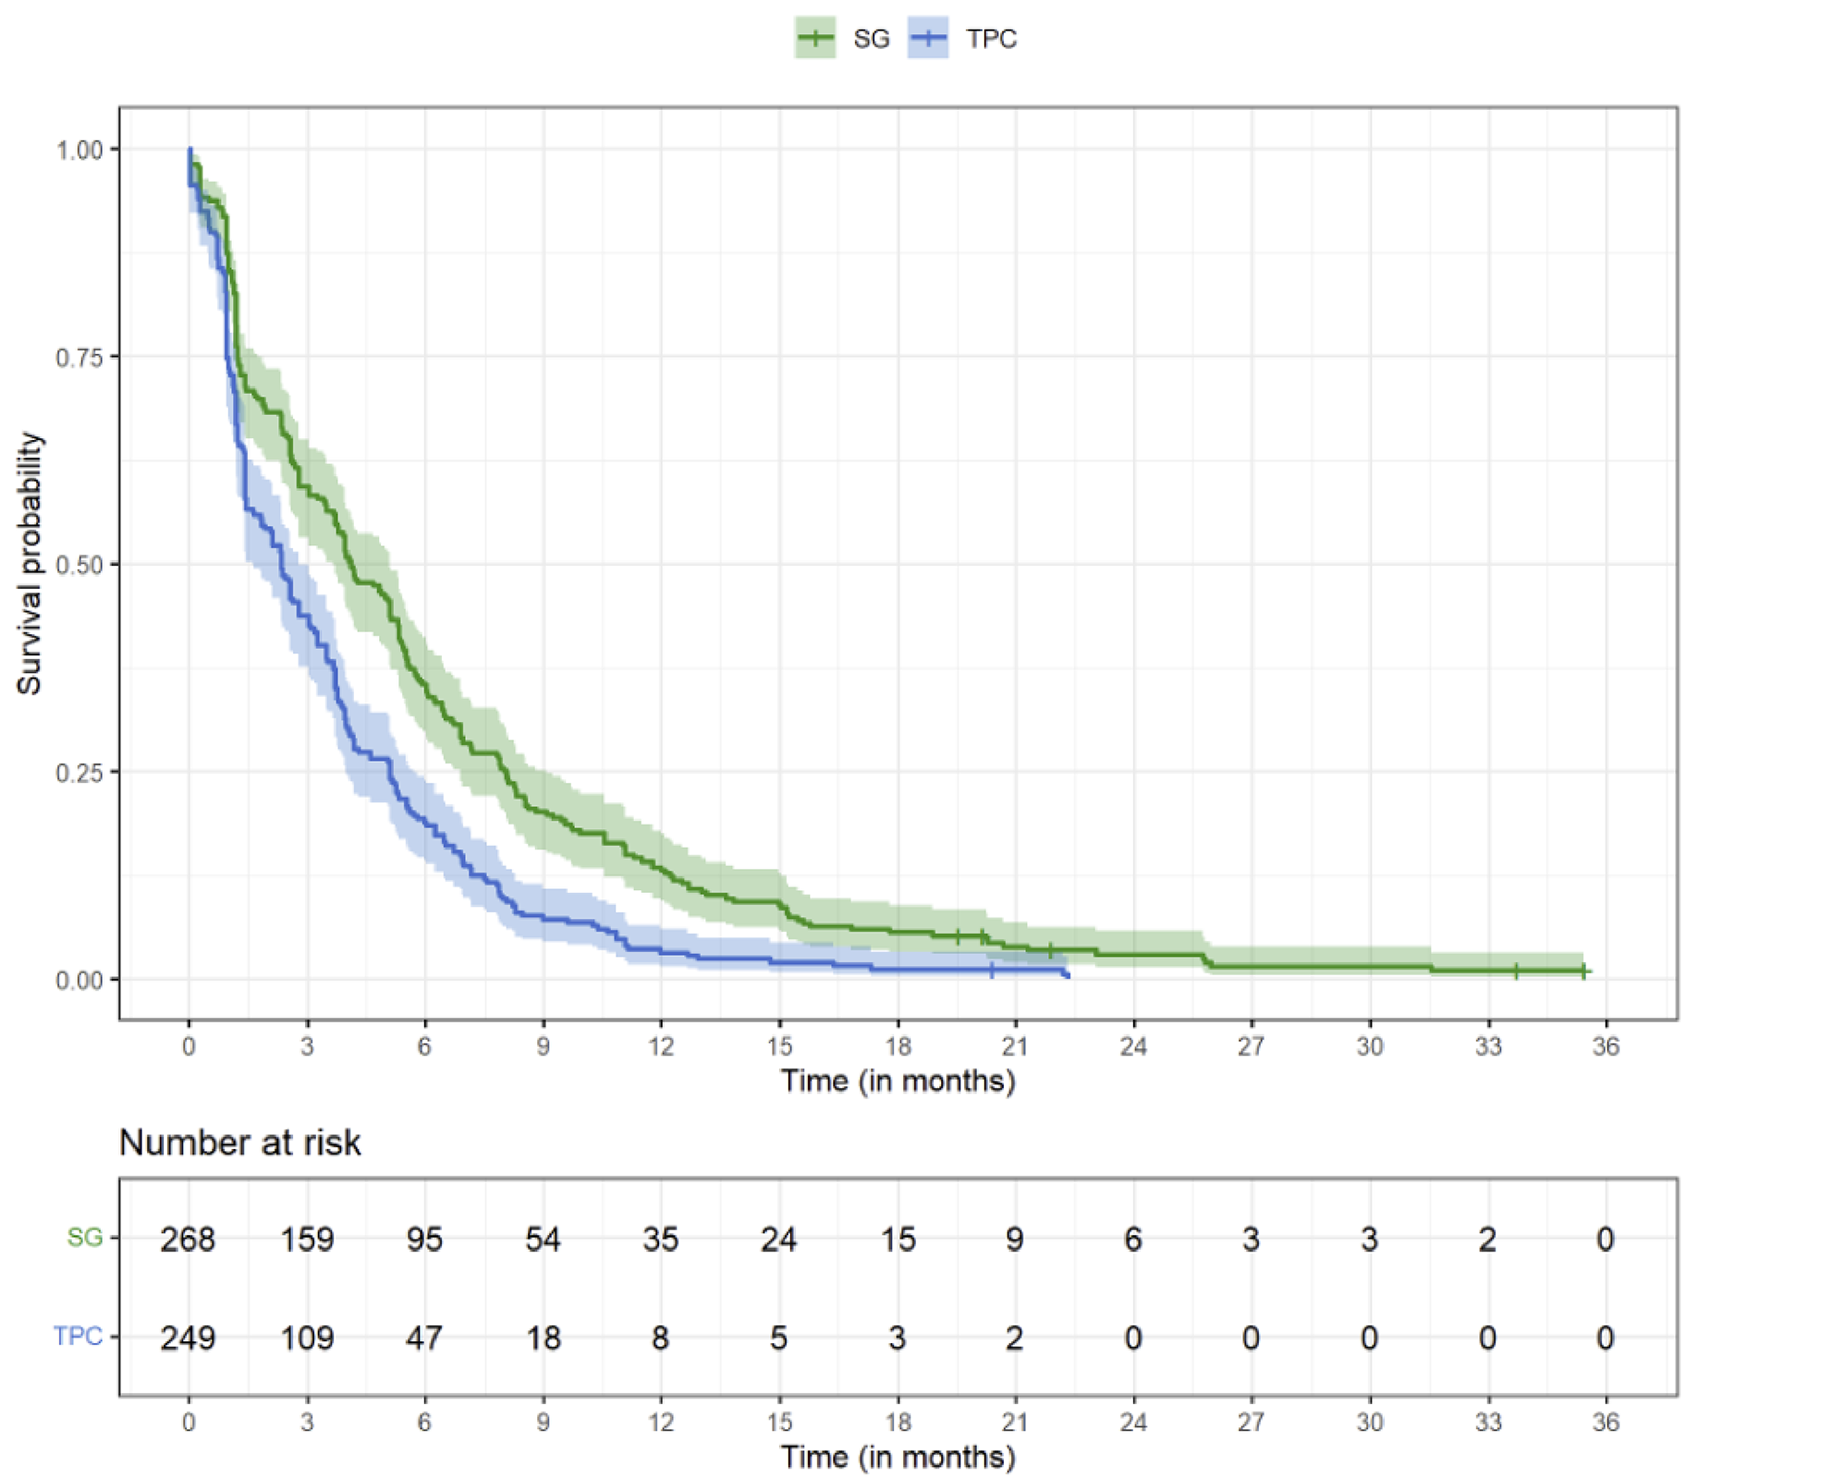 The sacituzumab govitecan and TPC curves separated after randomization through the remainder of patient follow-up.